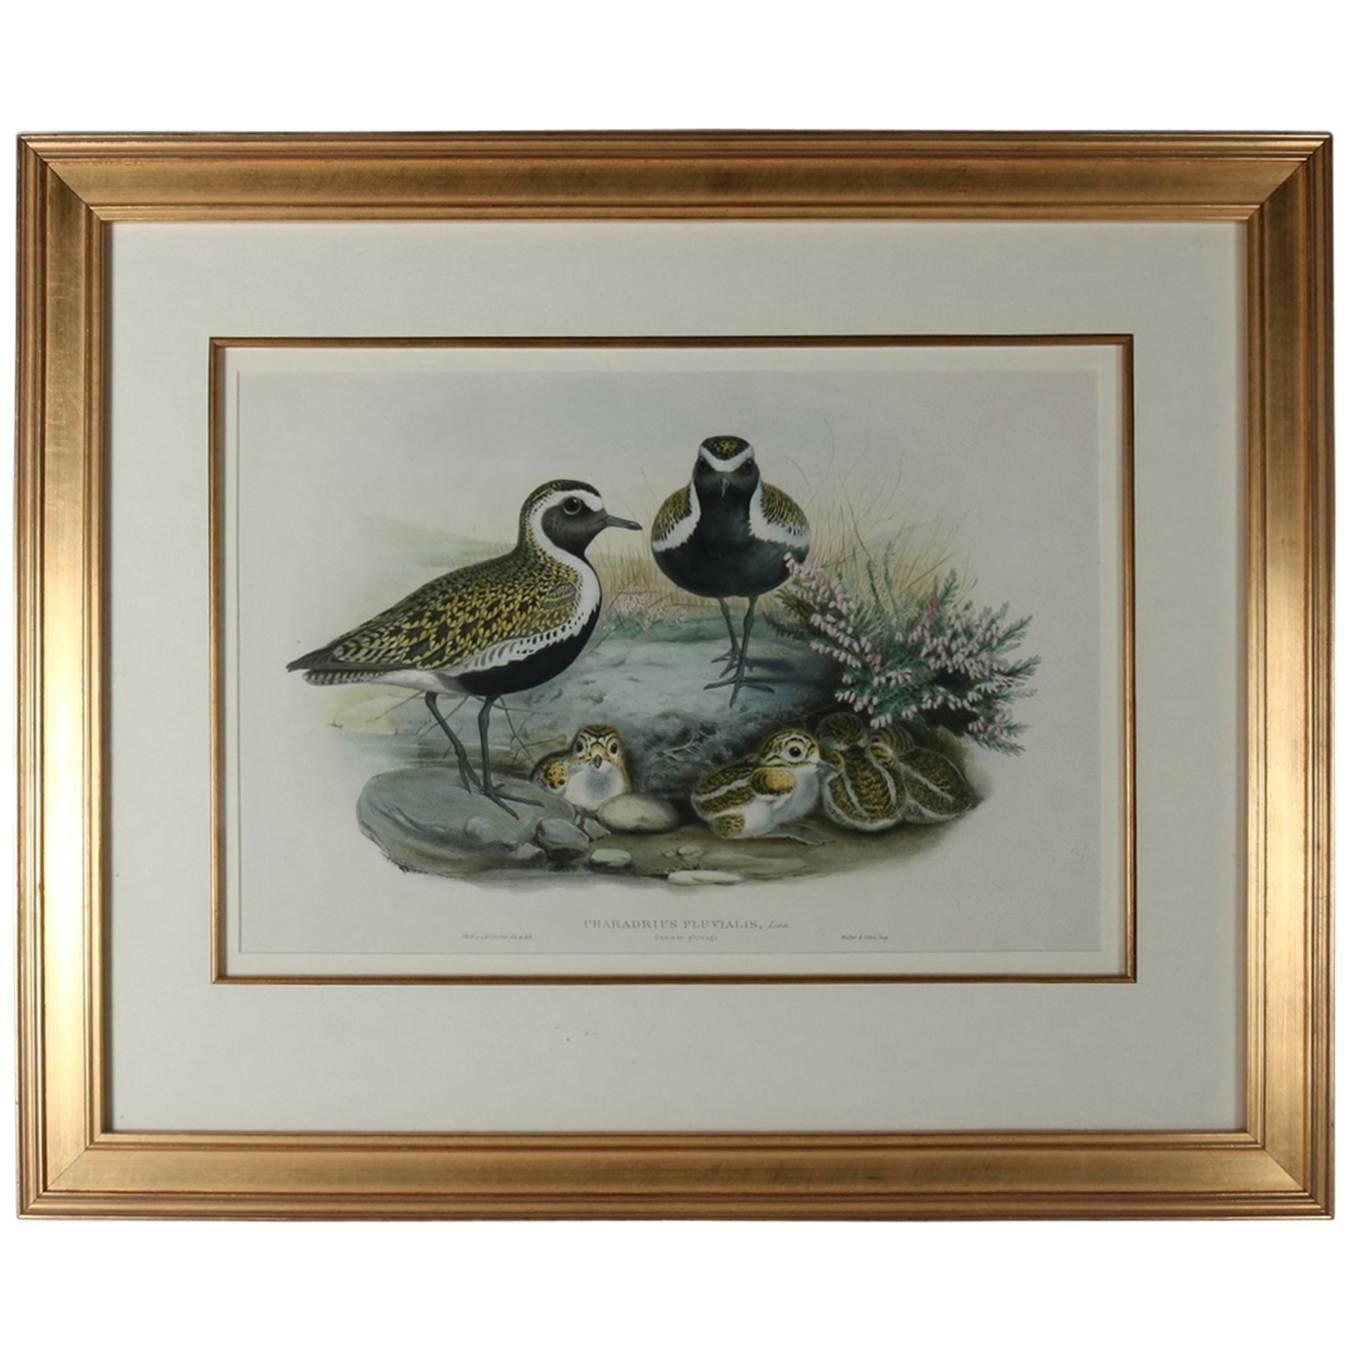 Audubon School Hand Colored Lithograph "Charadrius Pluvialis, Linn" after Gould